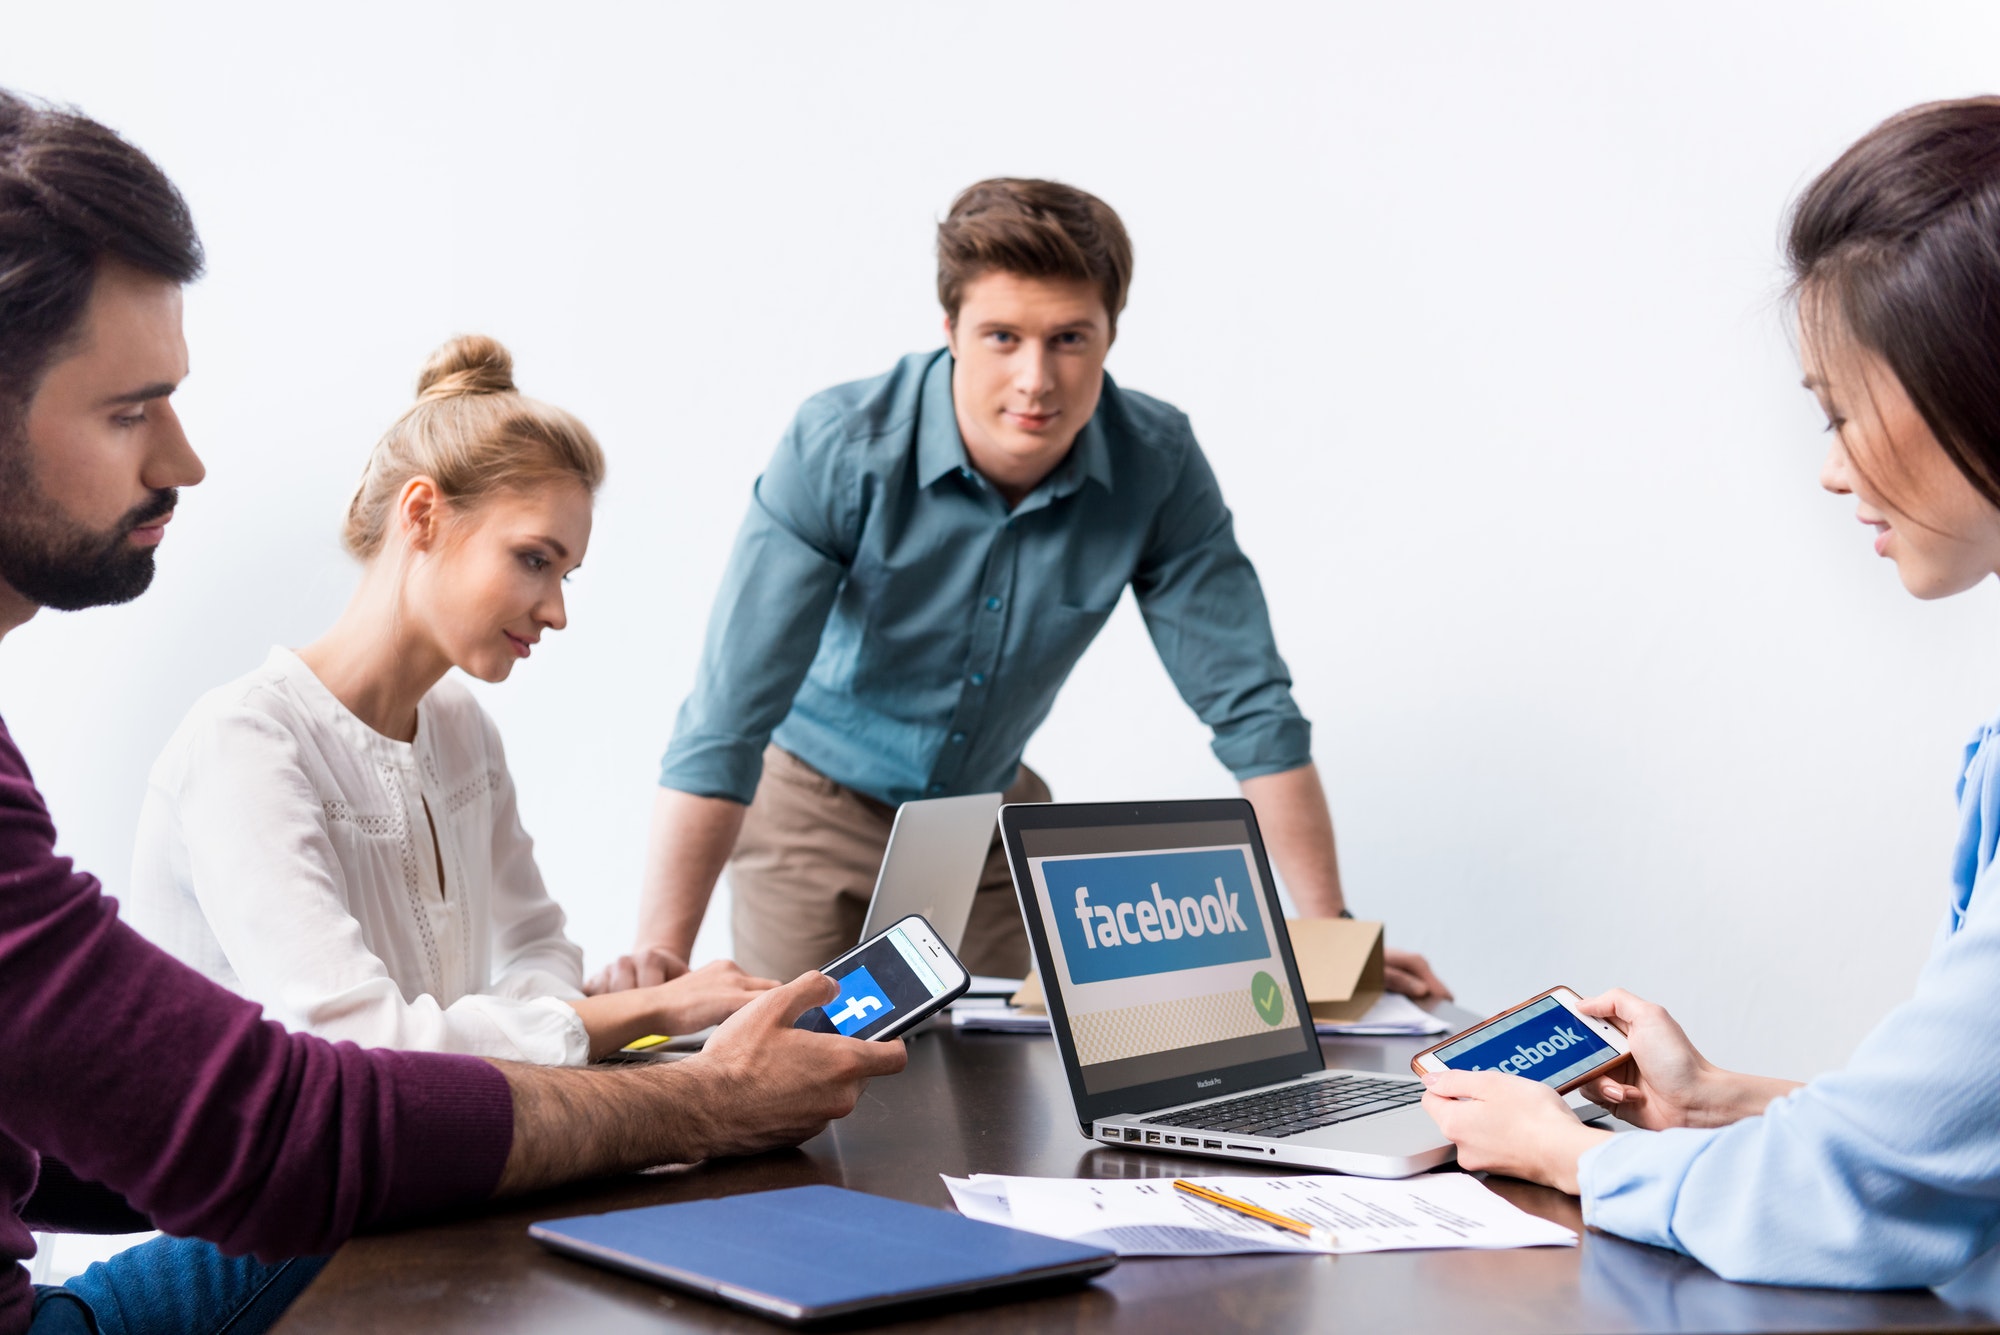 young-businesspeople-using-digital-devices-with-facebook-logo-icons-on-screens.jpg